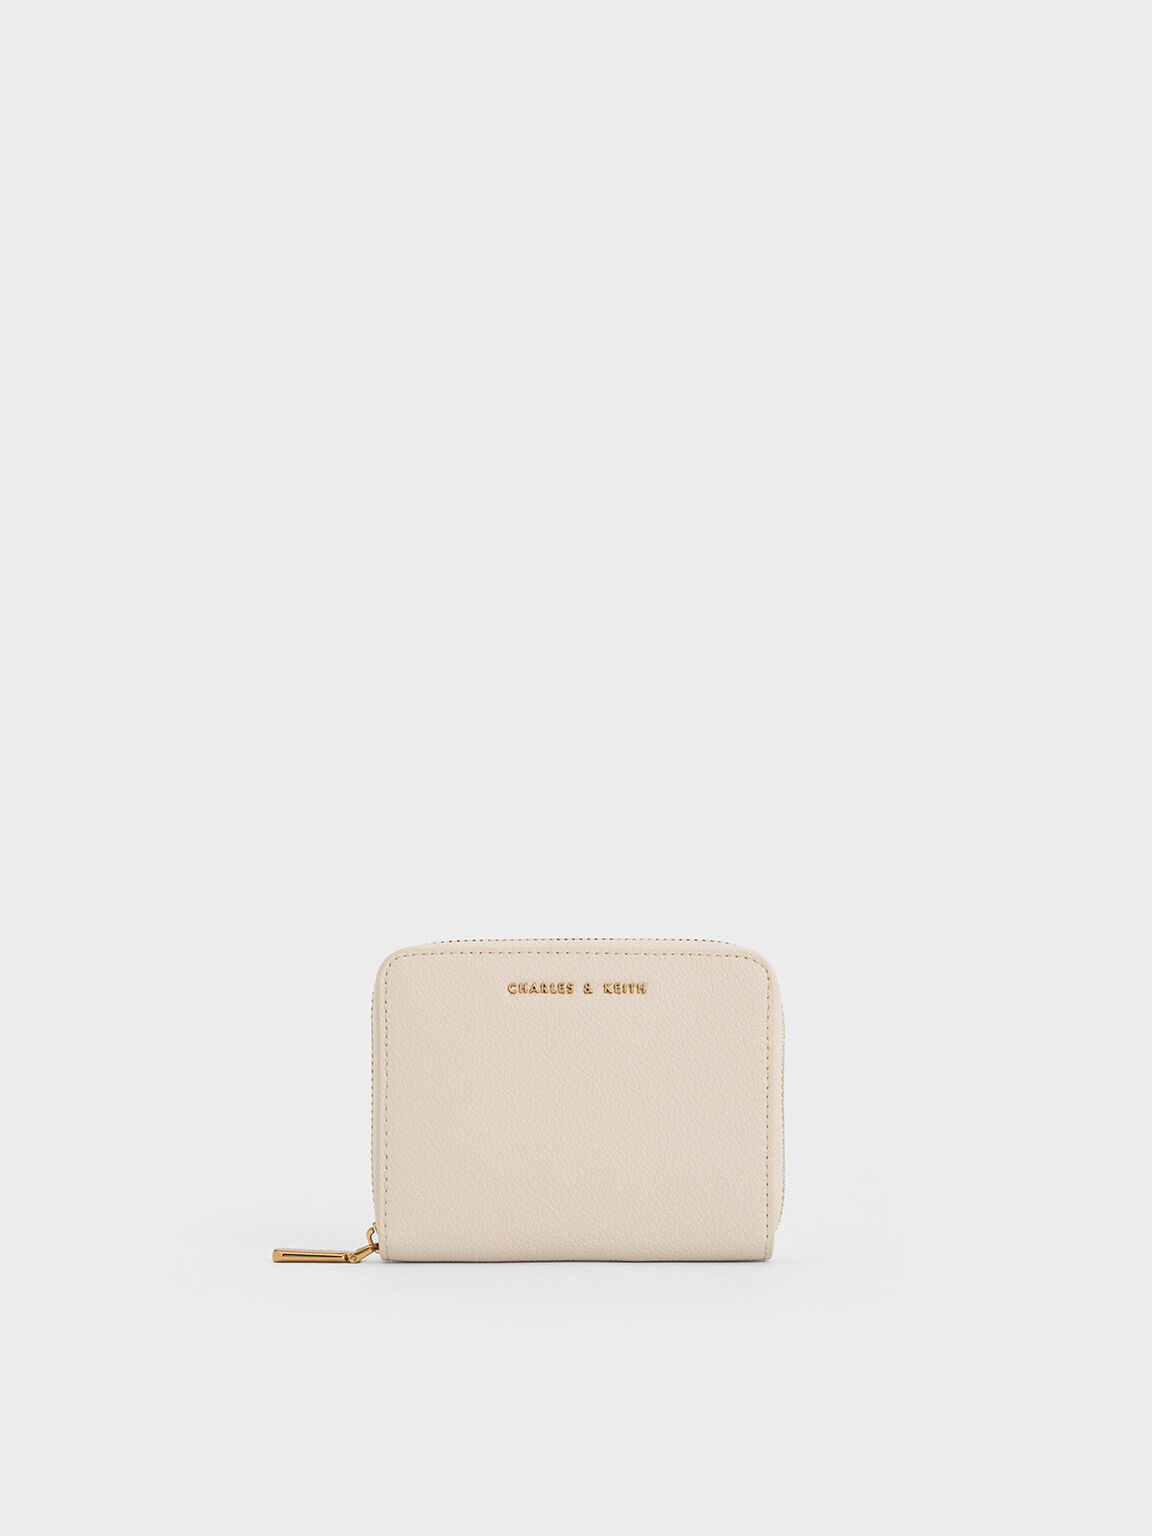 Charles & Keith Clove Crossbody Bag in Natural | Lyst